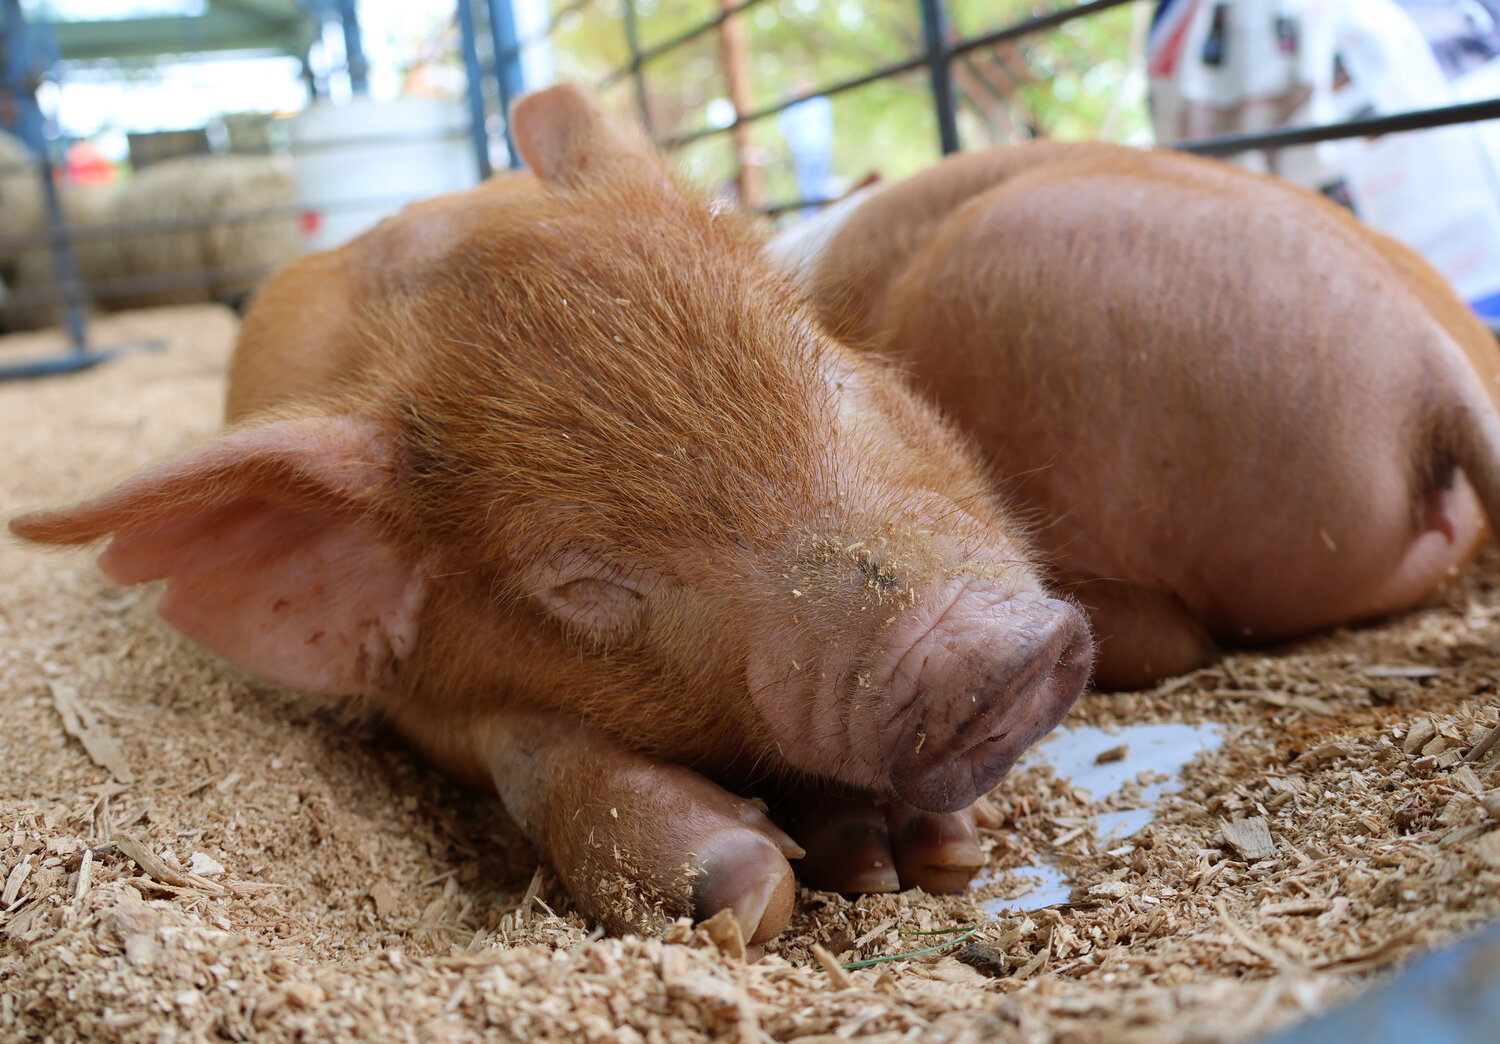 These pigs are enjoying a snooze during a quiet moment at last weekend's A-Day festivities at Delaware Valley University.